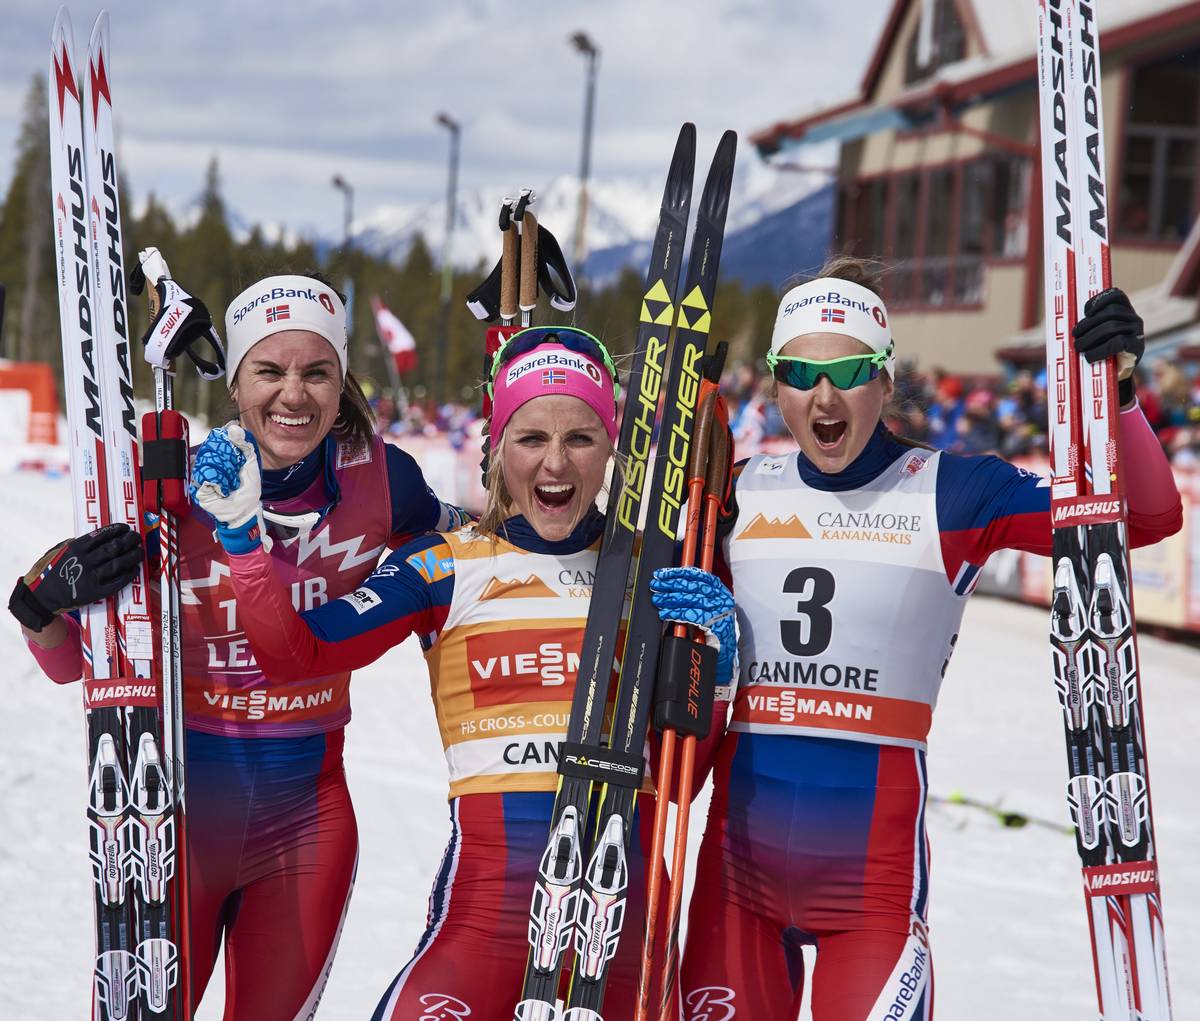 What makes the Norwegian women so dominant? The top six women from the 2014-2015 World Cup were put through their paces on a ski treadmill, and their physiology - as well as their year-round training - was described in a new paper. That includes Ski Tour Canada winner Therese Johaug (c), runner-up Heidi Weng (l), and third-place and Ingvild Flugstad Østberg (r).  (Photo: Madshus/NordicFocus)